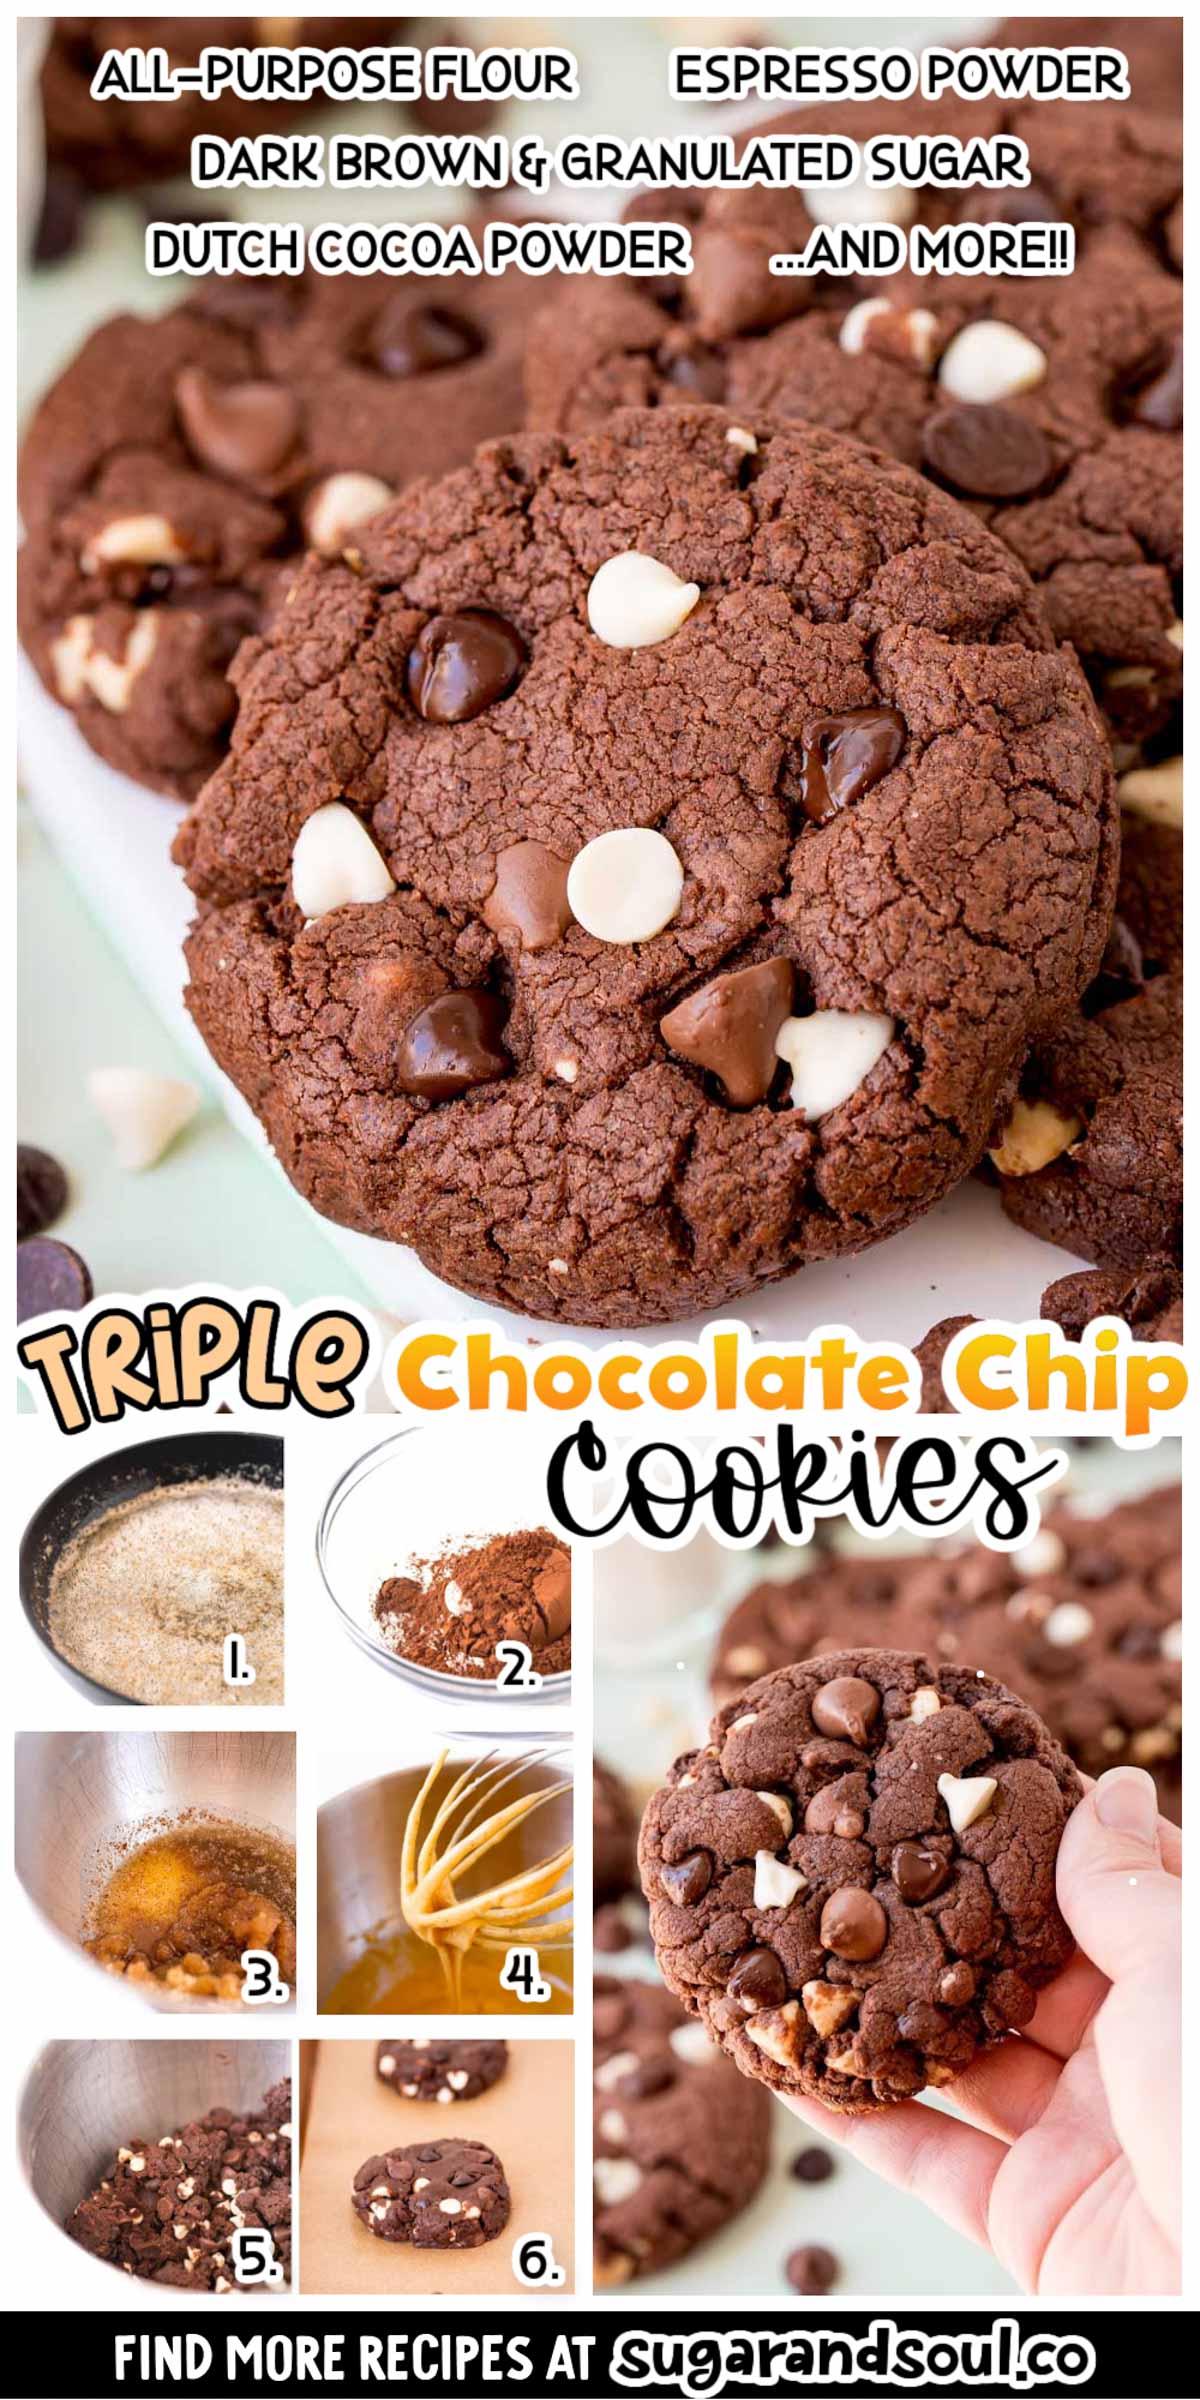 Triple Chocolate Chip Cookies are made with espresso powder and Dutch-processed cocoa powder, giving them incredibly deep, rich flavor! Made with three kinds of chocolate chips - dark, milk, and white chocolate! via @sugarandsoulco